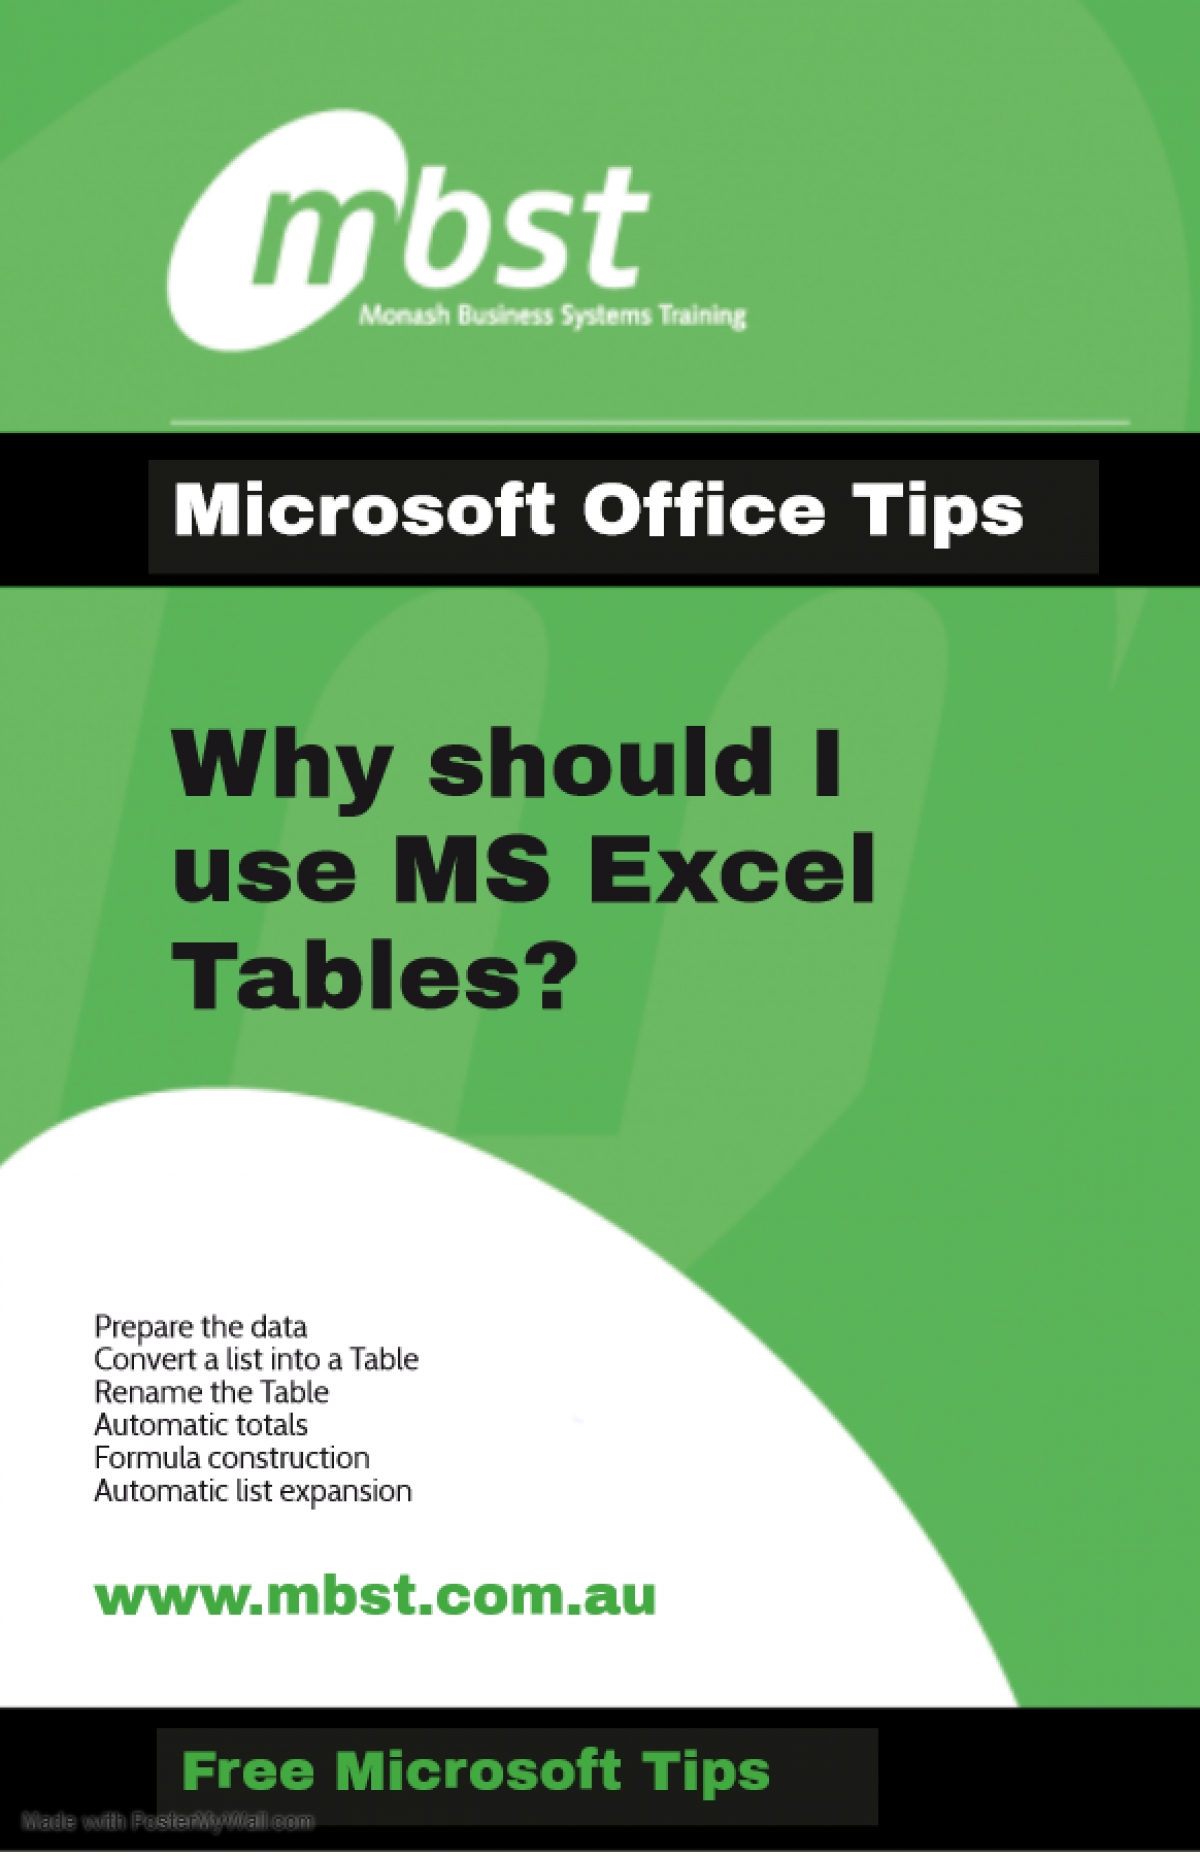 Why should I use MS Excel Tables?